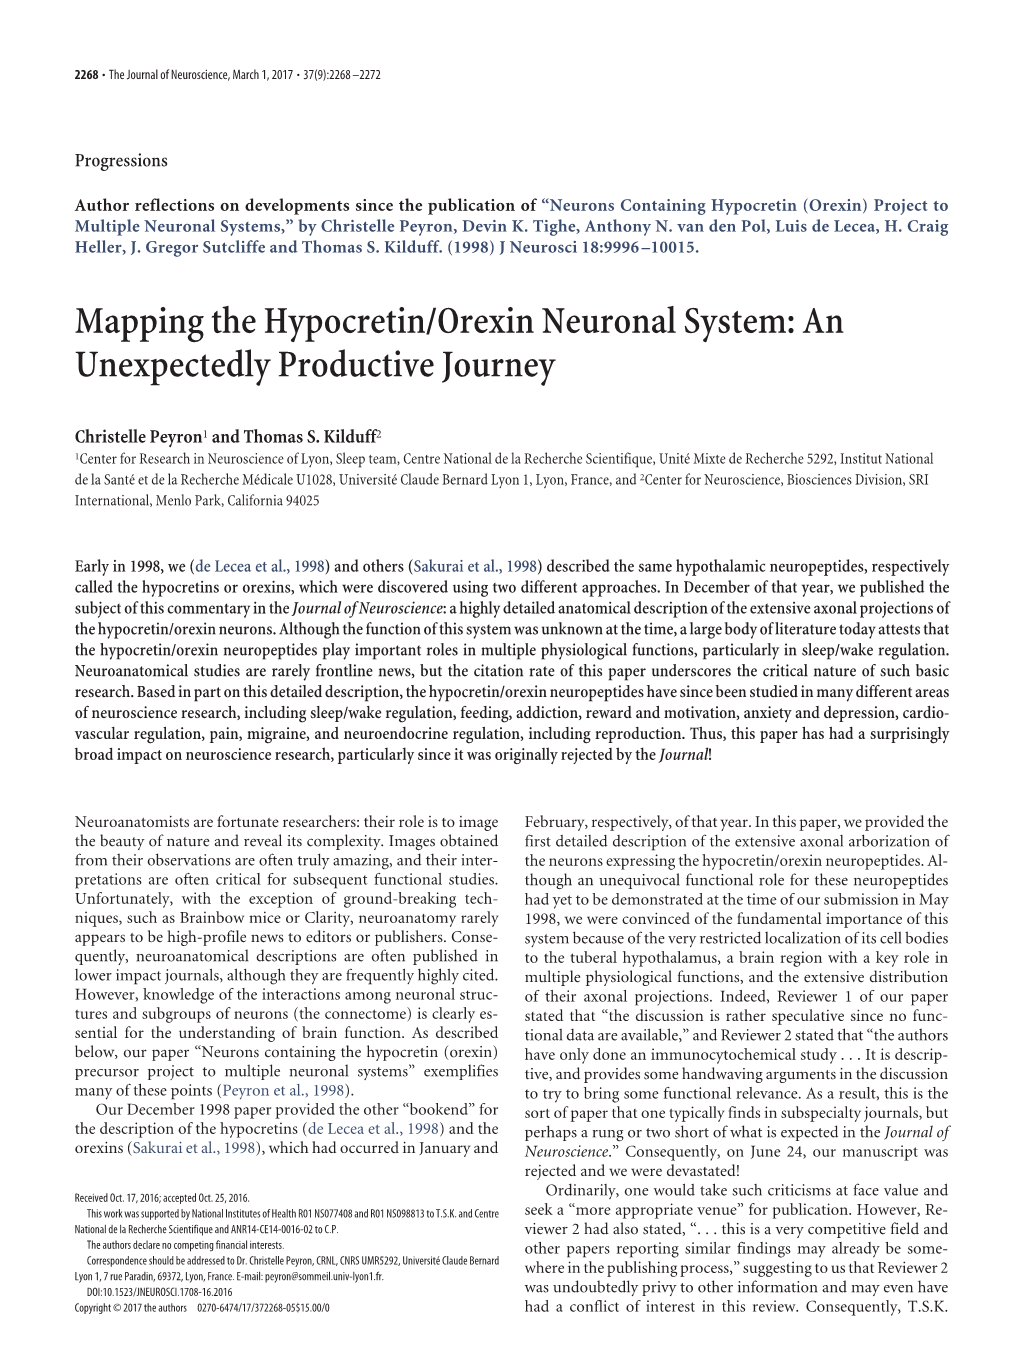 Mapping the Hypocretin/Orexin Neuronal System: an Unexpectedly Productive Journey